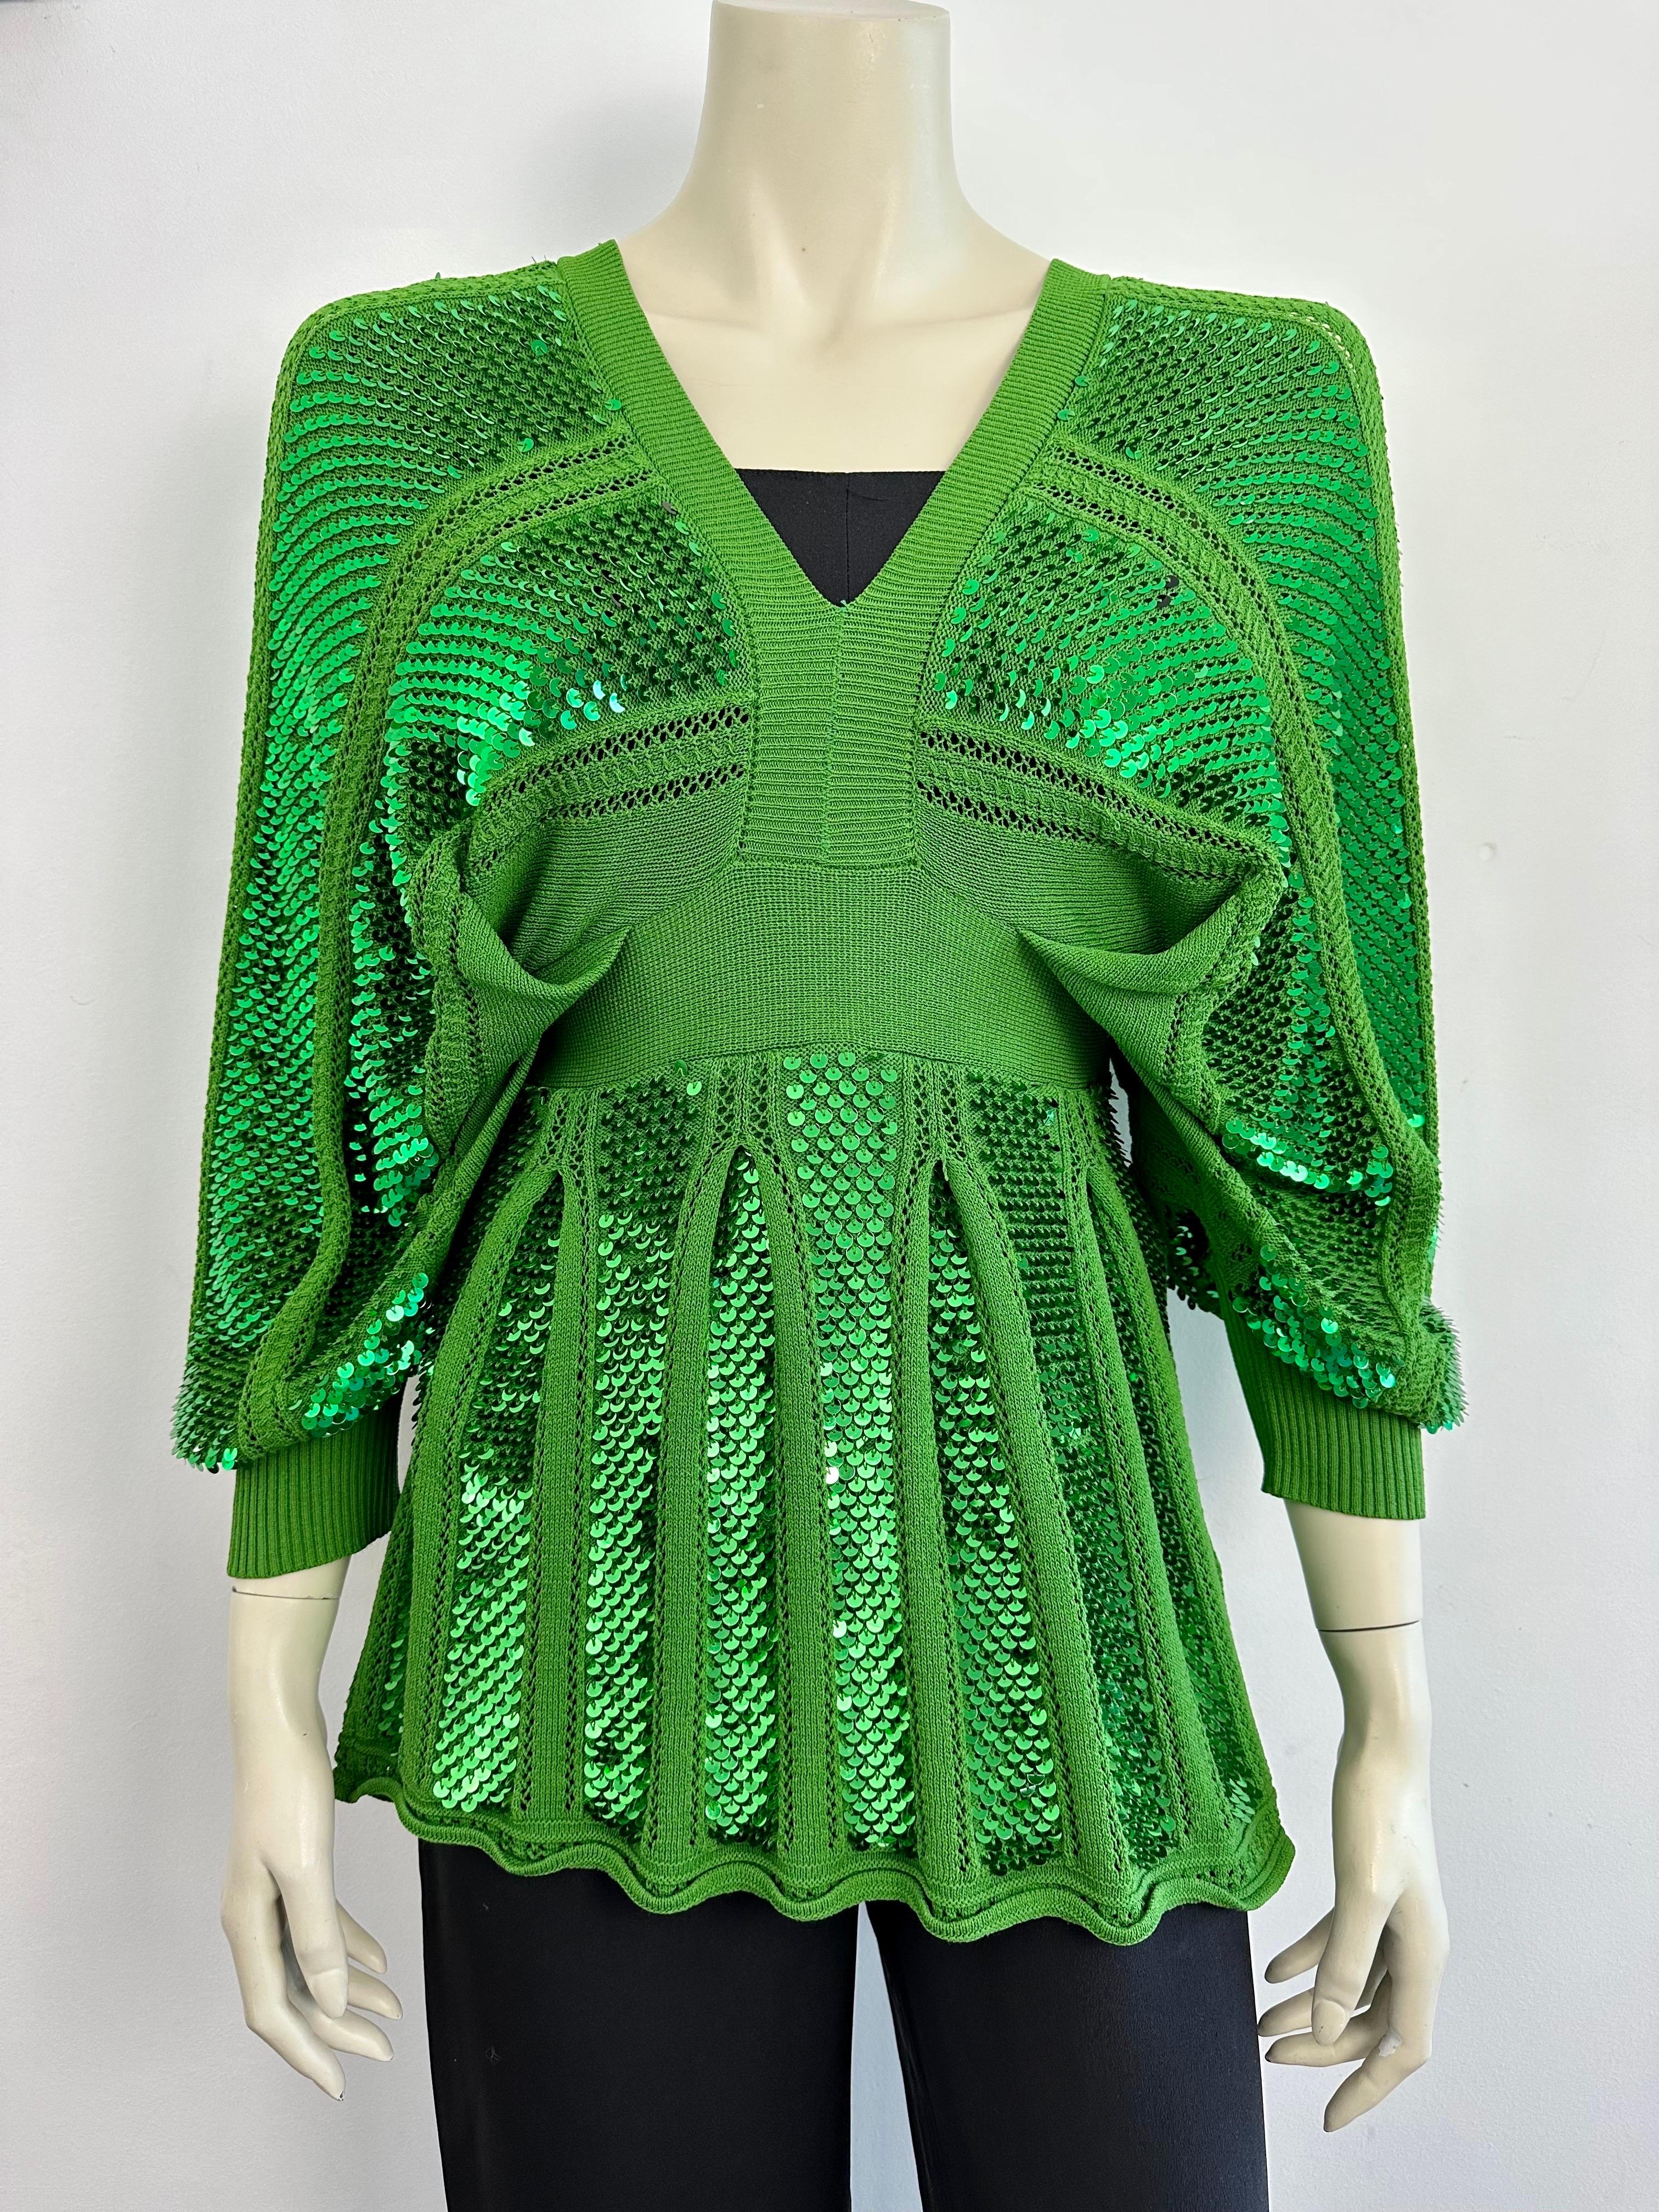 Sequin tunic top Kenzo Defilé
V-neckline front and back
Slightly balloon sleeves and bats tightened at bottom
Tightened under the bust
Side zipper
Size L
40cm under bust (stretch fabric)
70% wool 30% polyamide
Please note a small stain on the kenzo